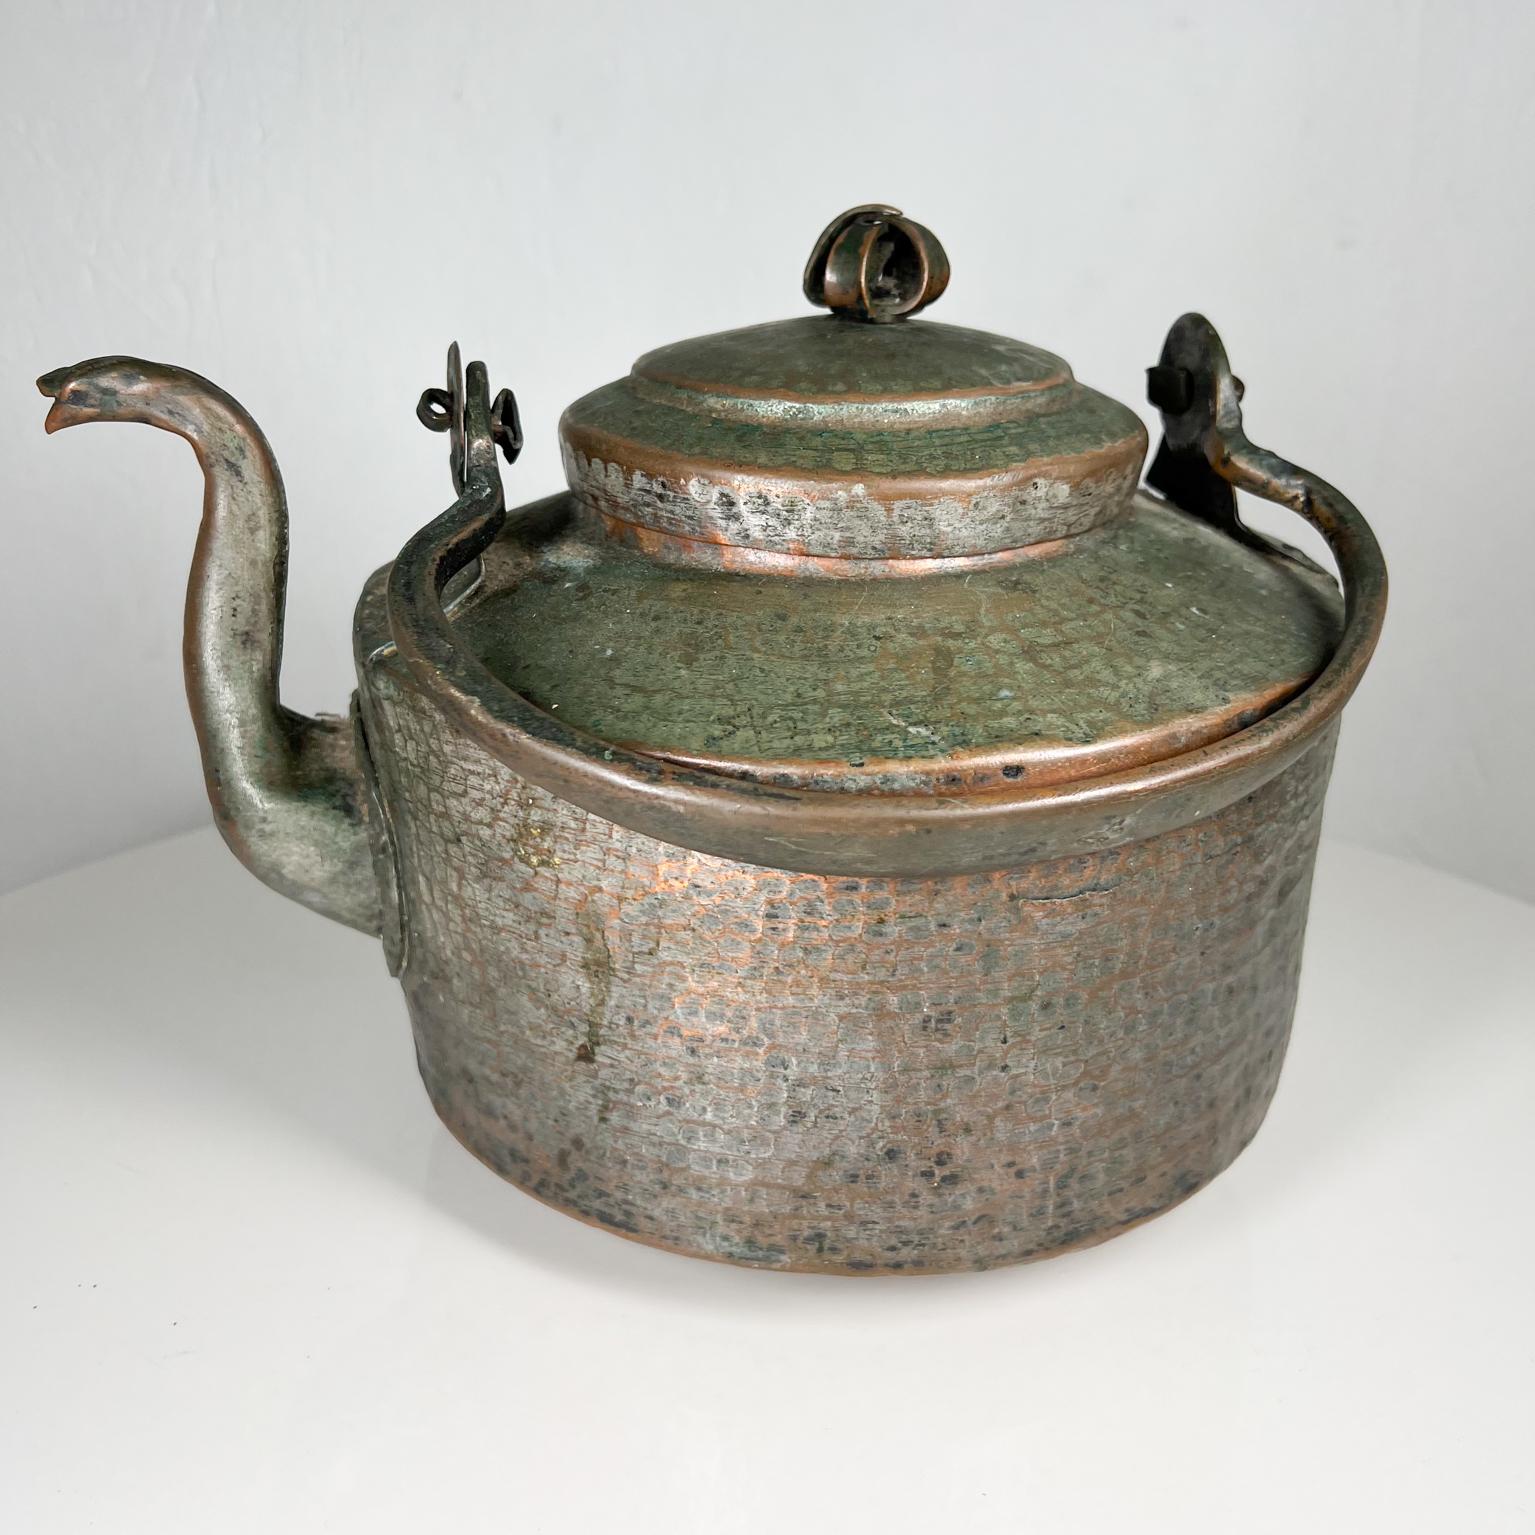 20th Century Antique Rustic Hammered Copper Tea Kettle with Flair For Sale